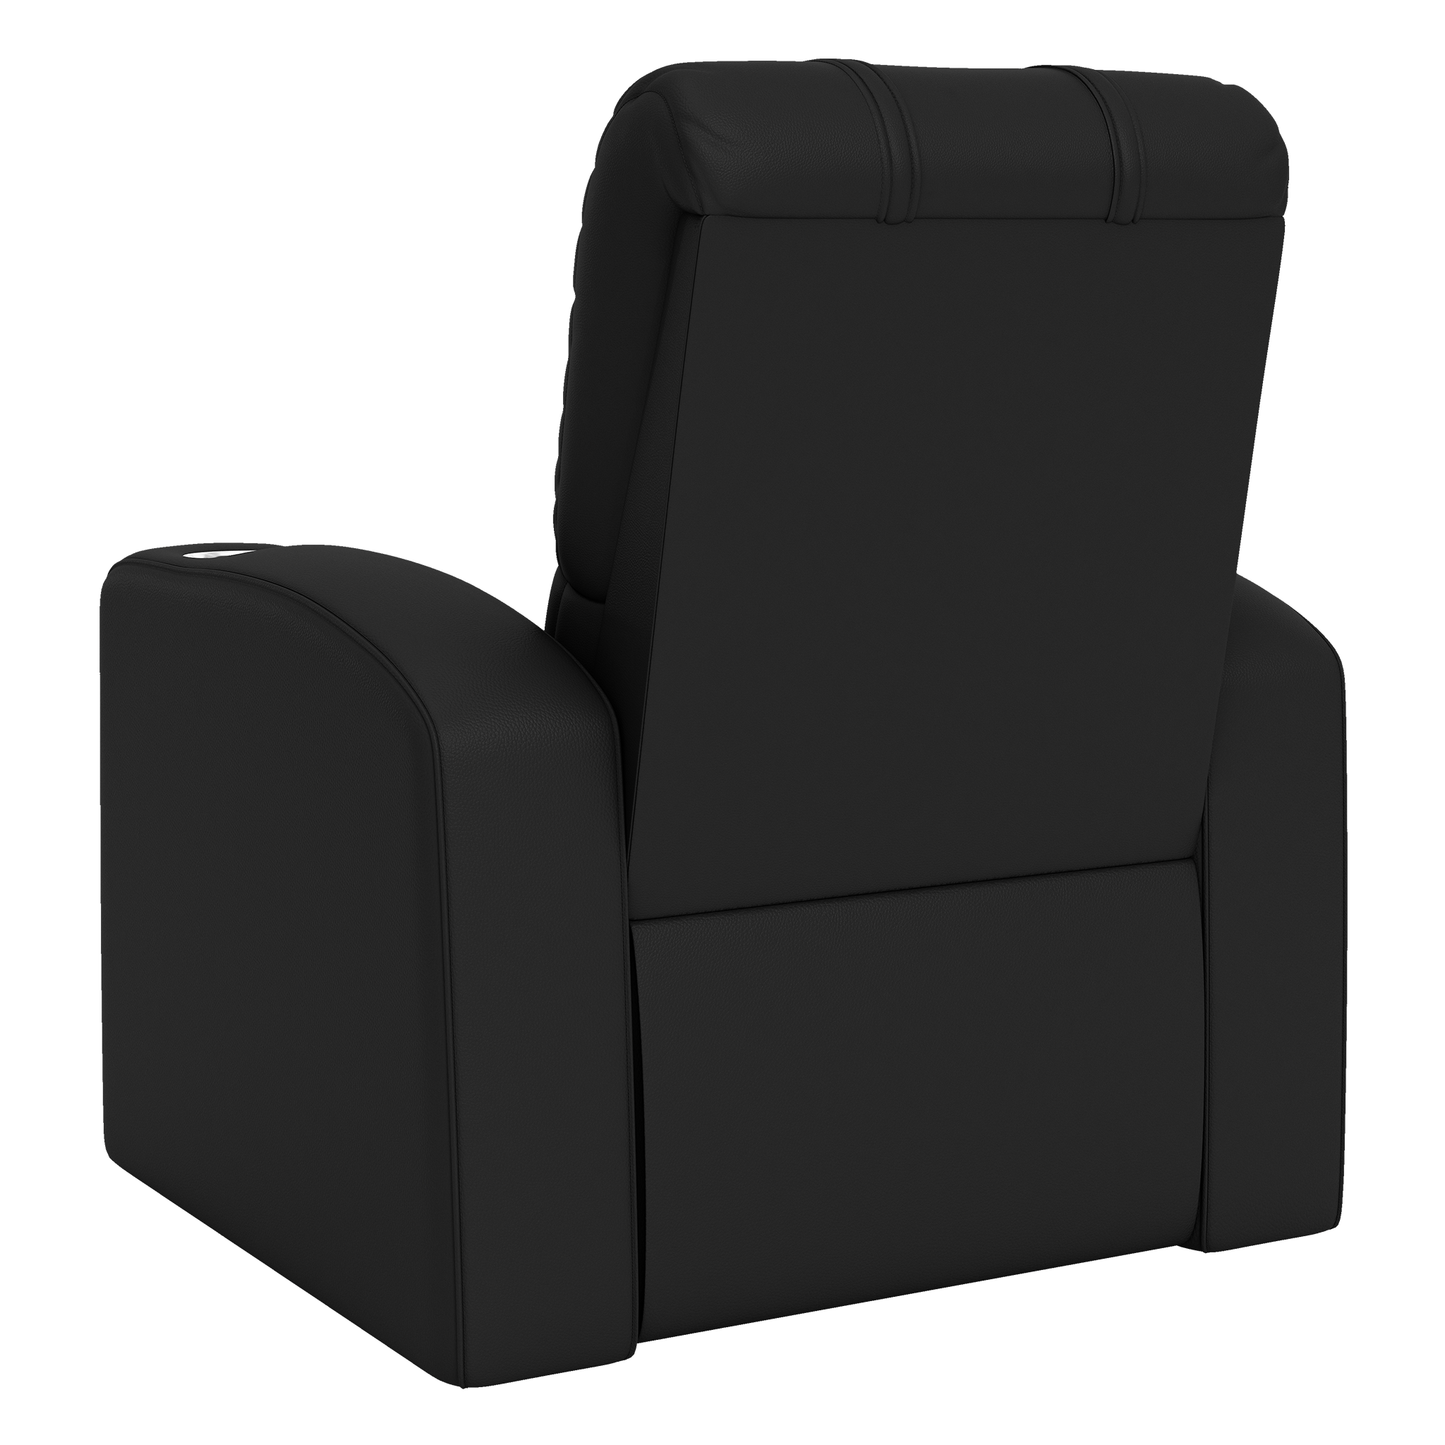 Relax Home Theater Recliner with 8oki Icon Logo